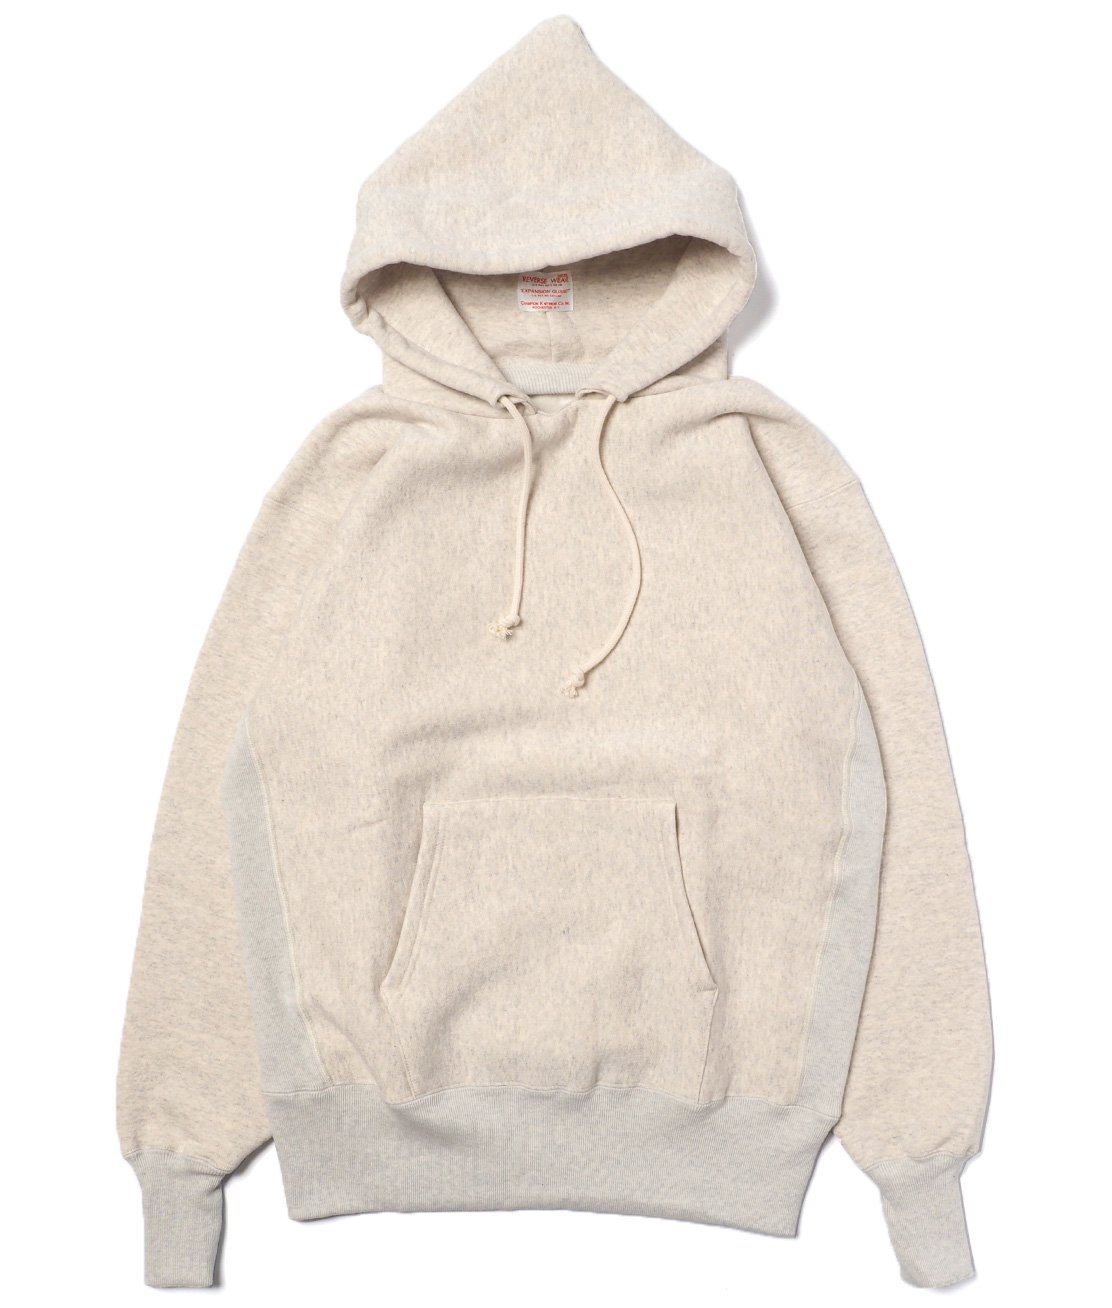 【Champion-TRUE TO ARCHIVES】C3-Q131 RW P/O AFTER HOODED SWEAT - SILVER GREY  パーカー 復刻 - HUNKY DORY